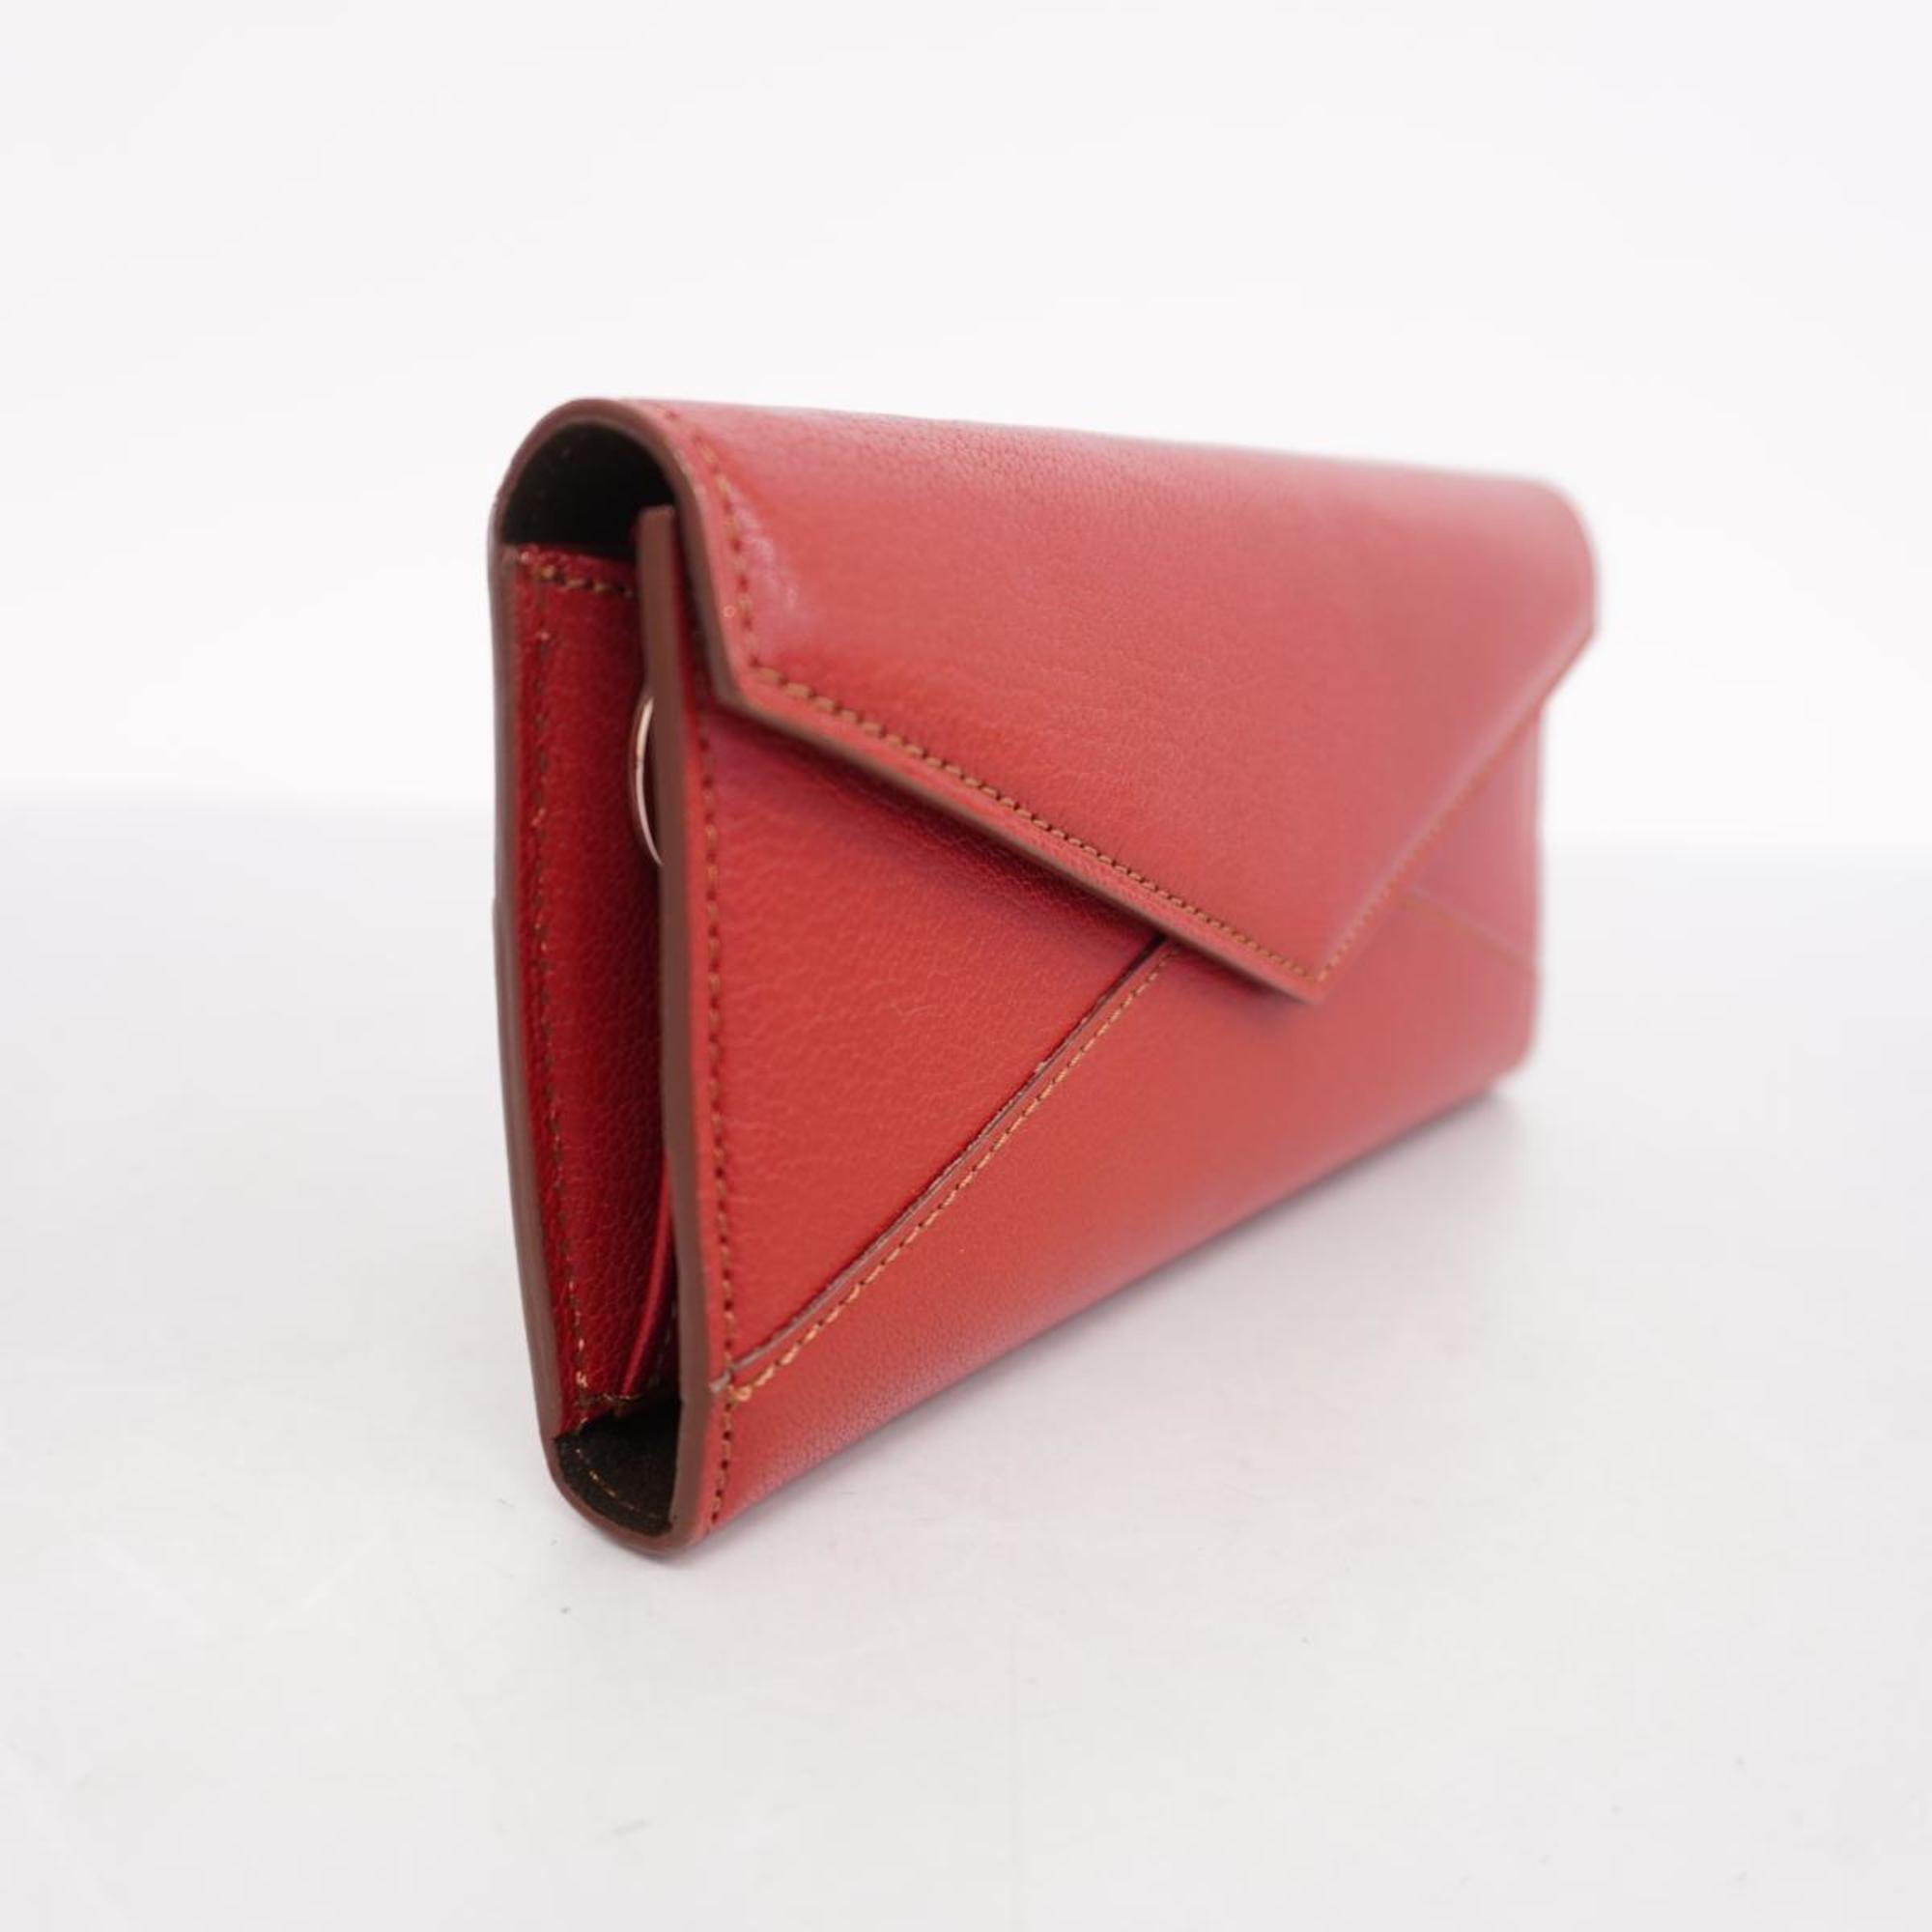 Cartier long wallet Le Must leather red ladies